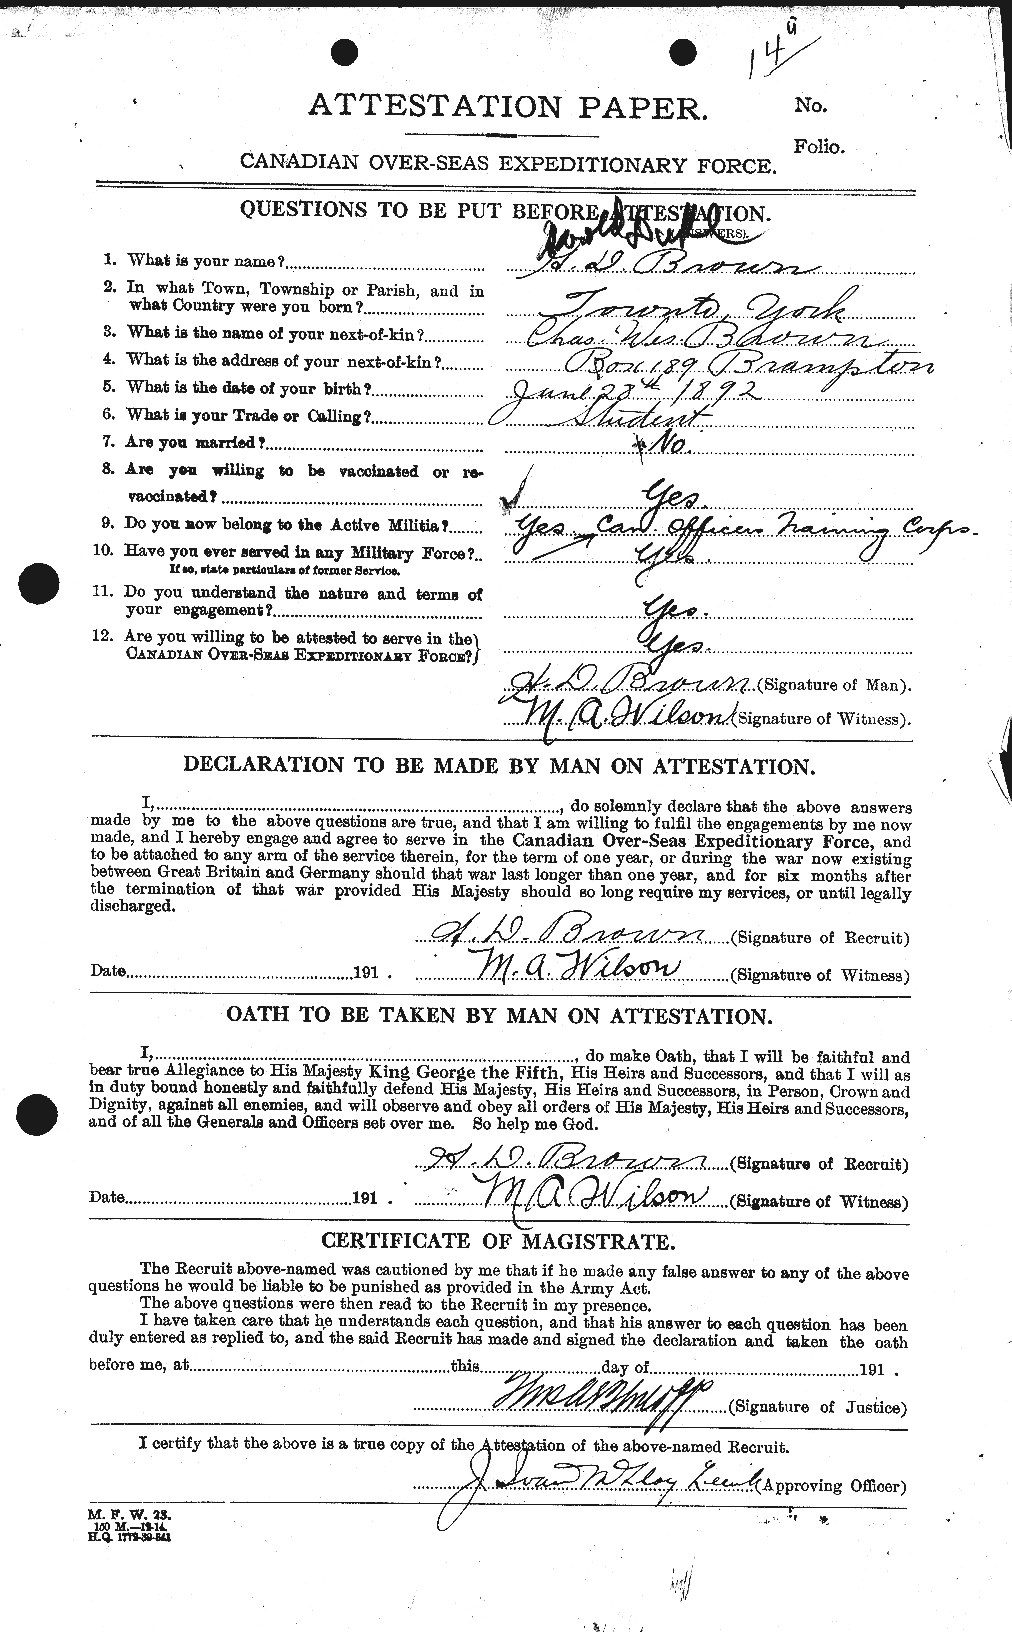 Personnel Records of the First World War - CEF 265353a